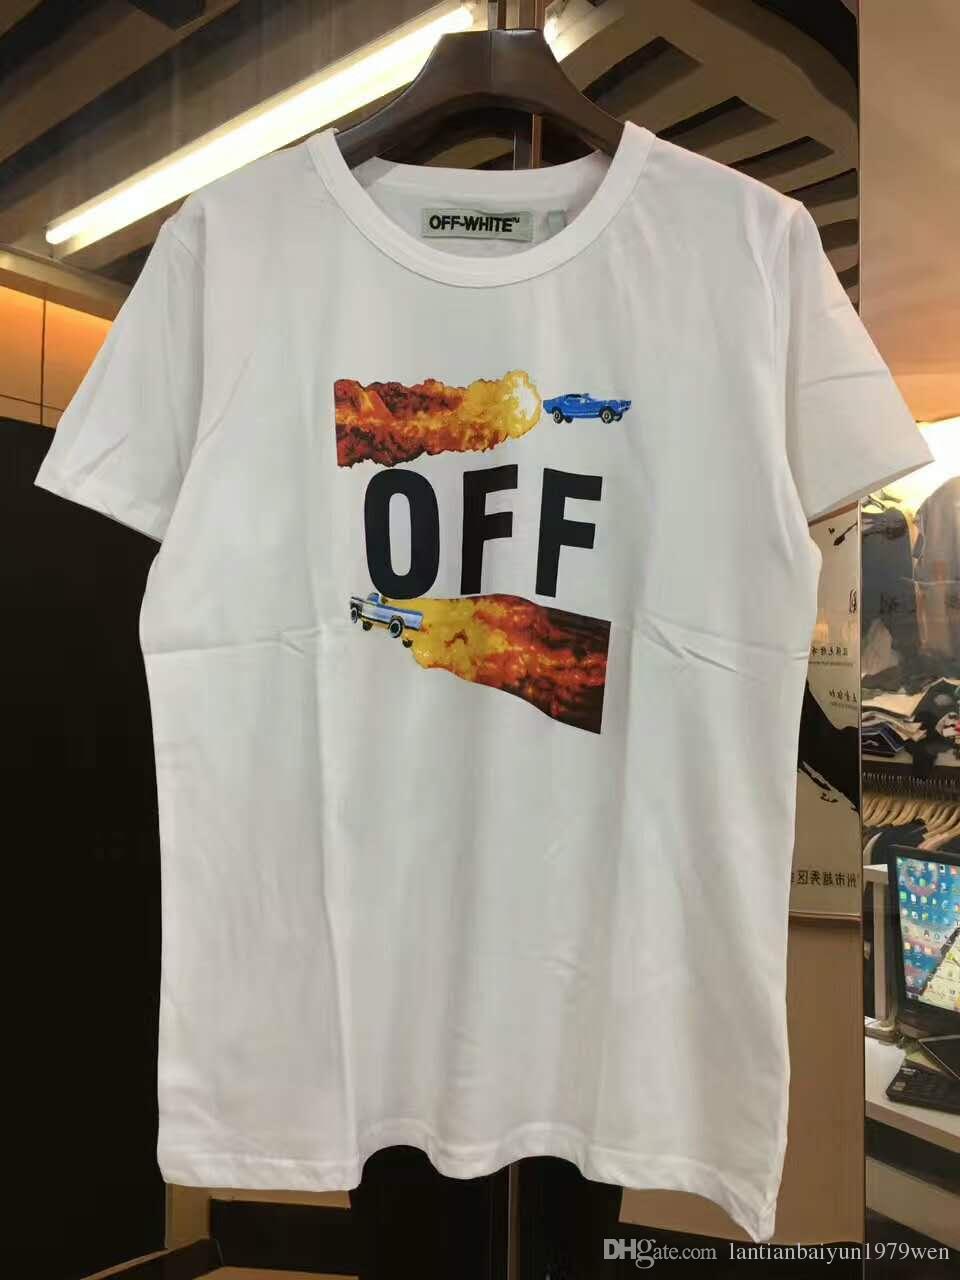 Off White Brand Flame Logo - Ew Brand OFF WHITE Back Twill Colorful Spitfire Car Flame Men Women